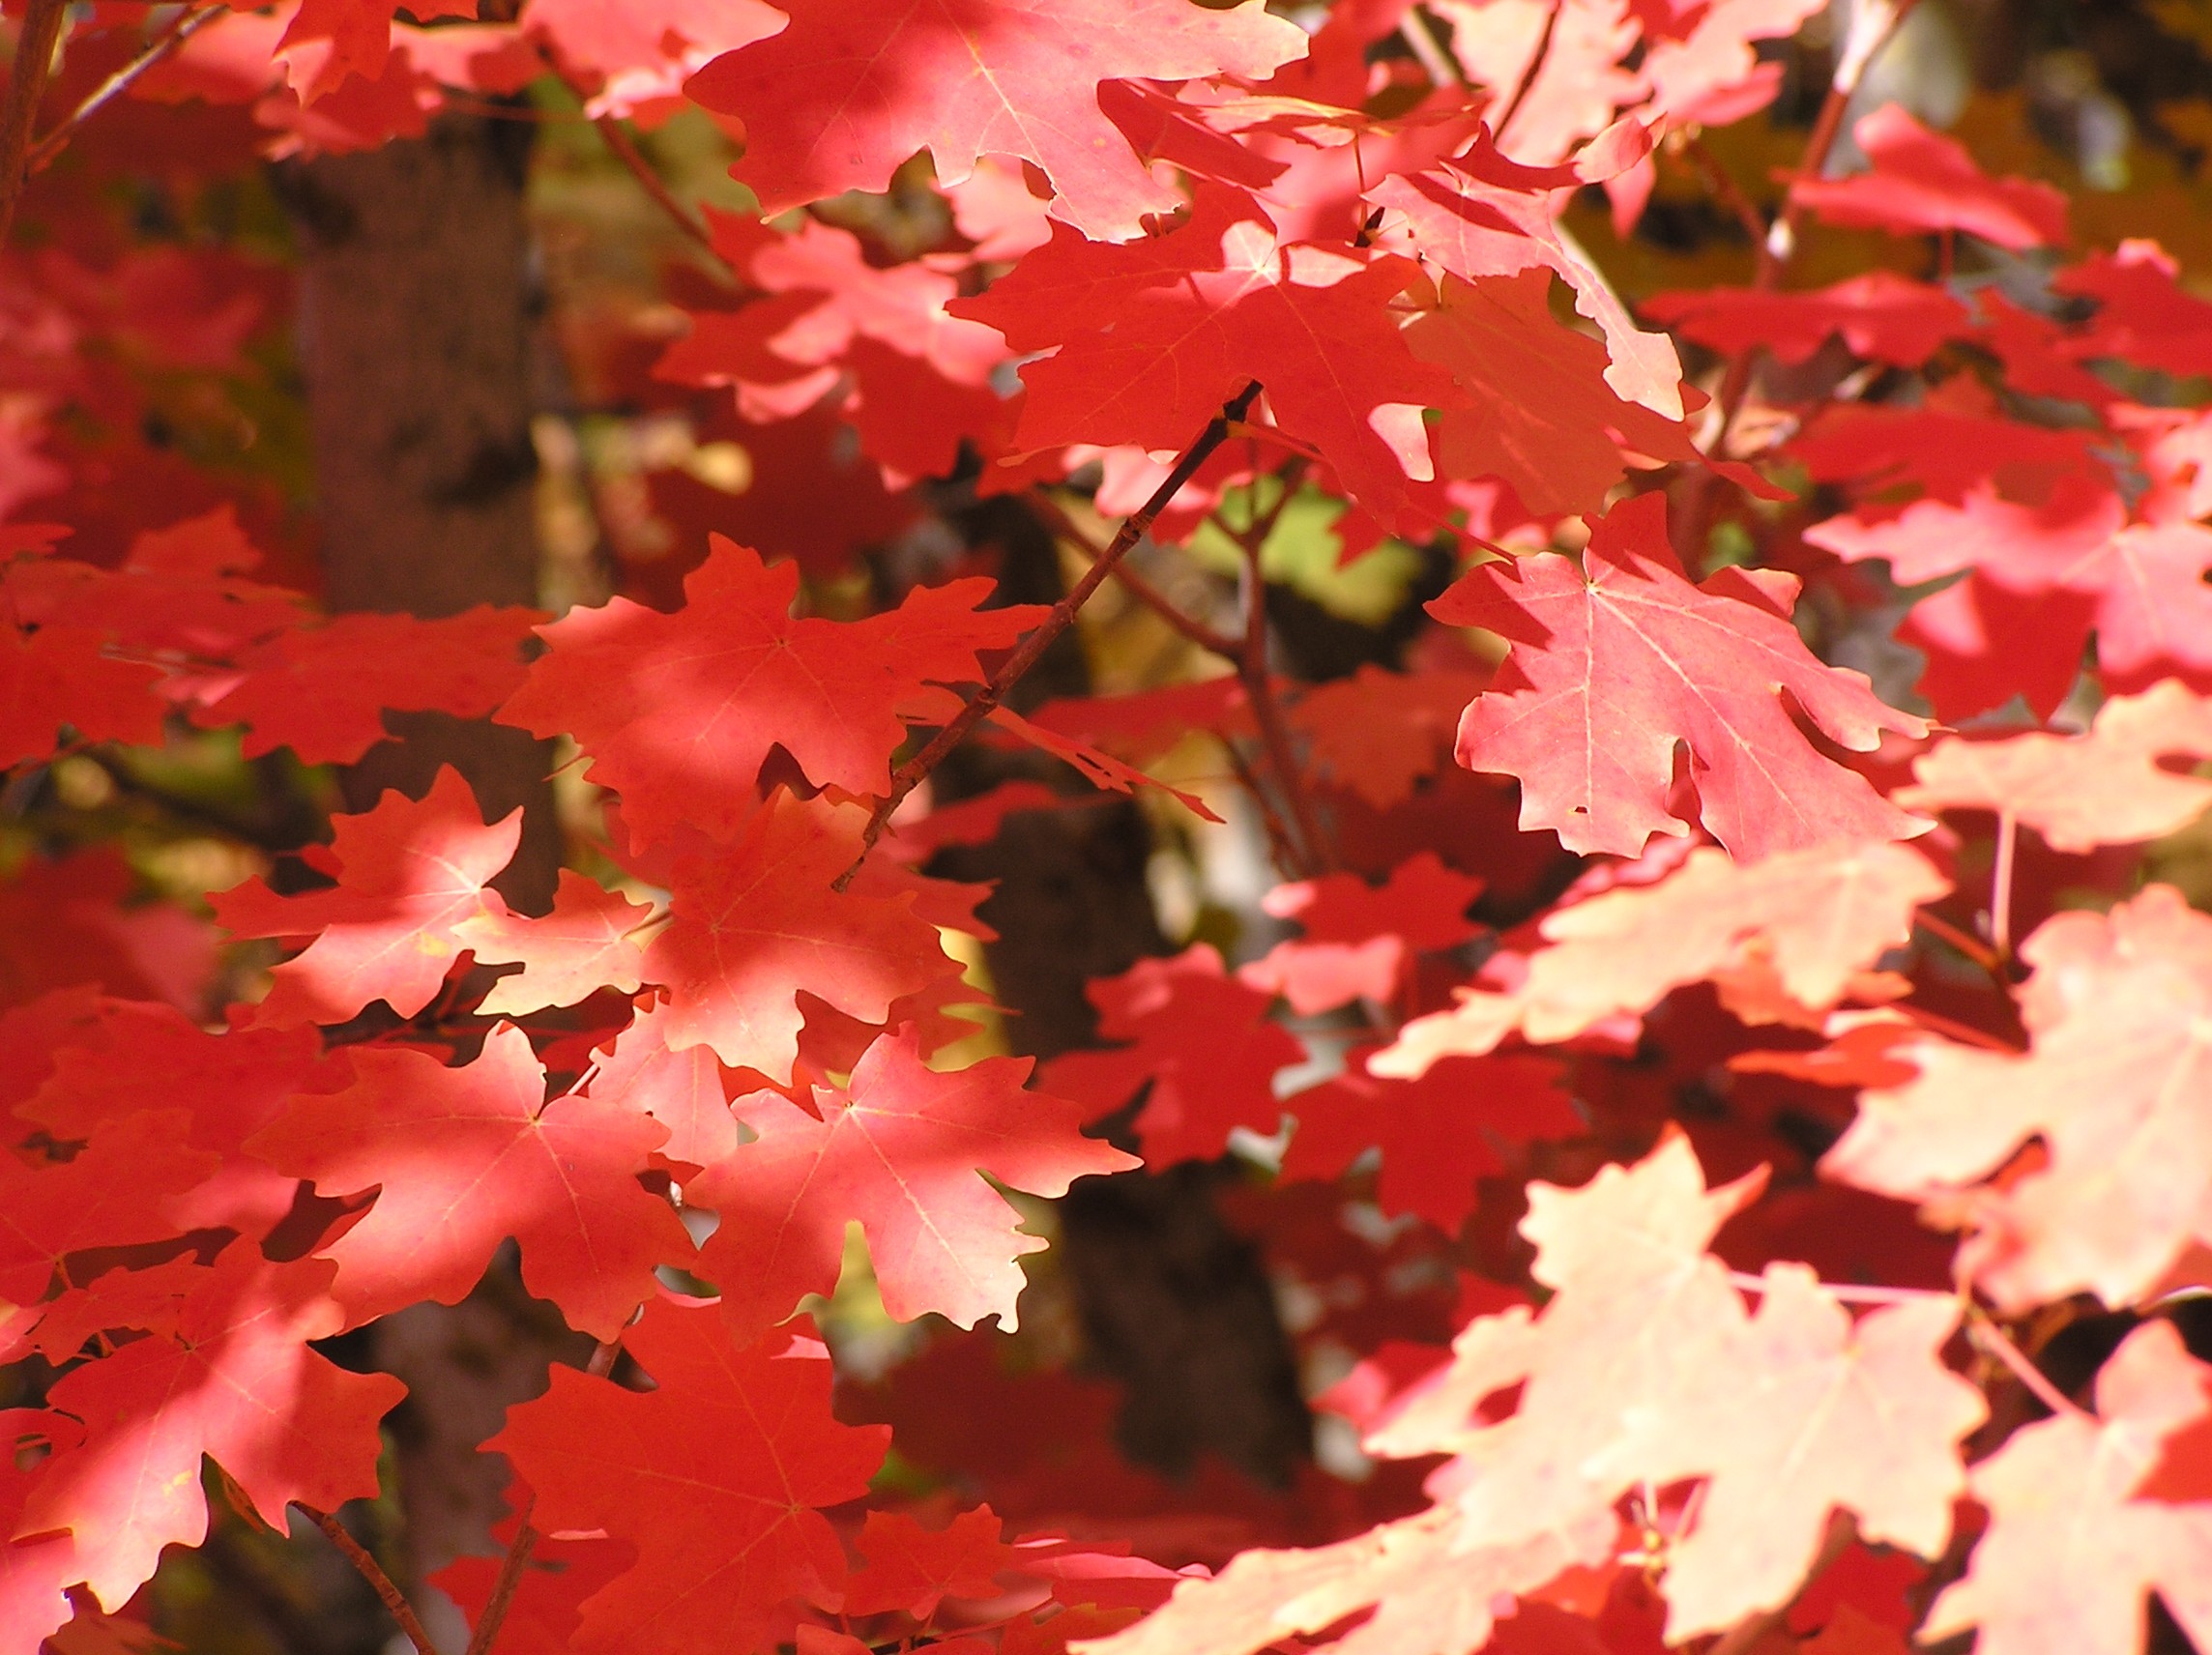 bigtooth maple leaves in fall